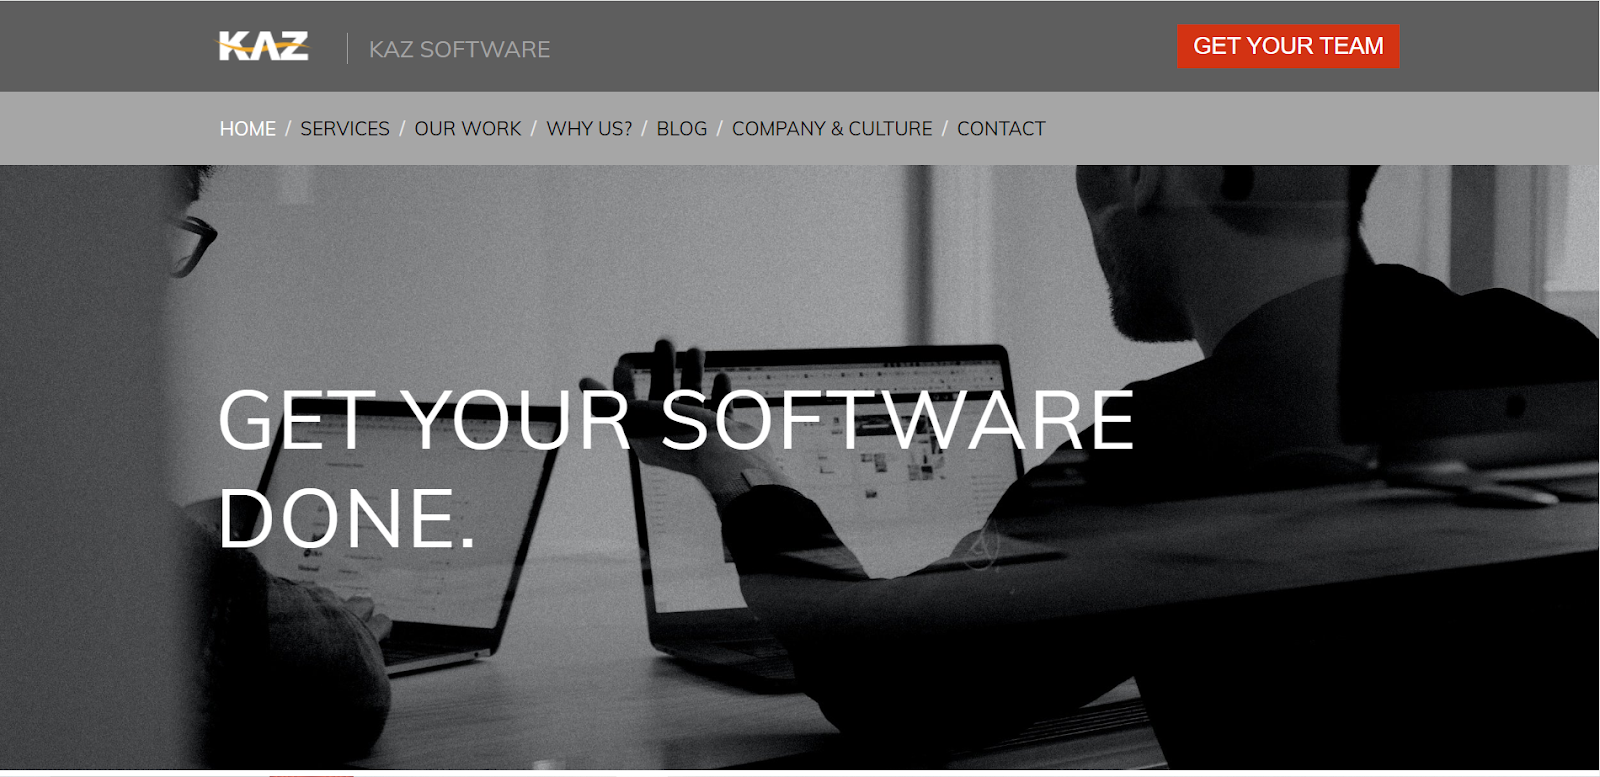 Kaz software is a good software company in Bangladesh